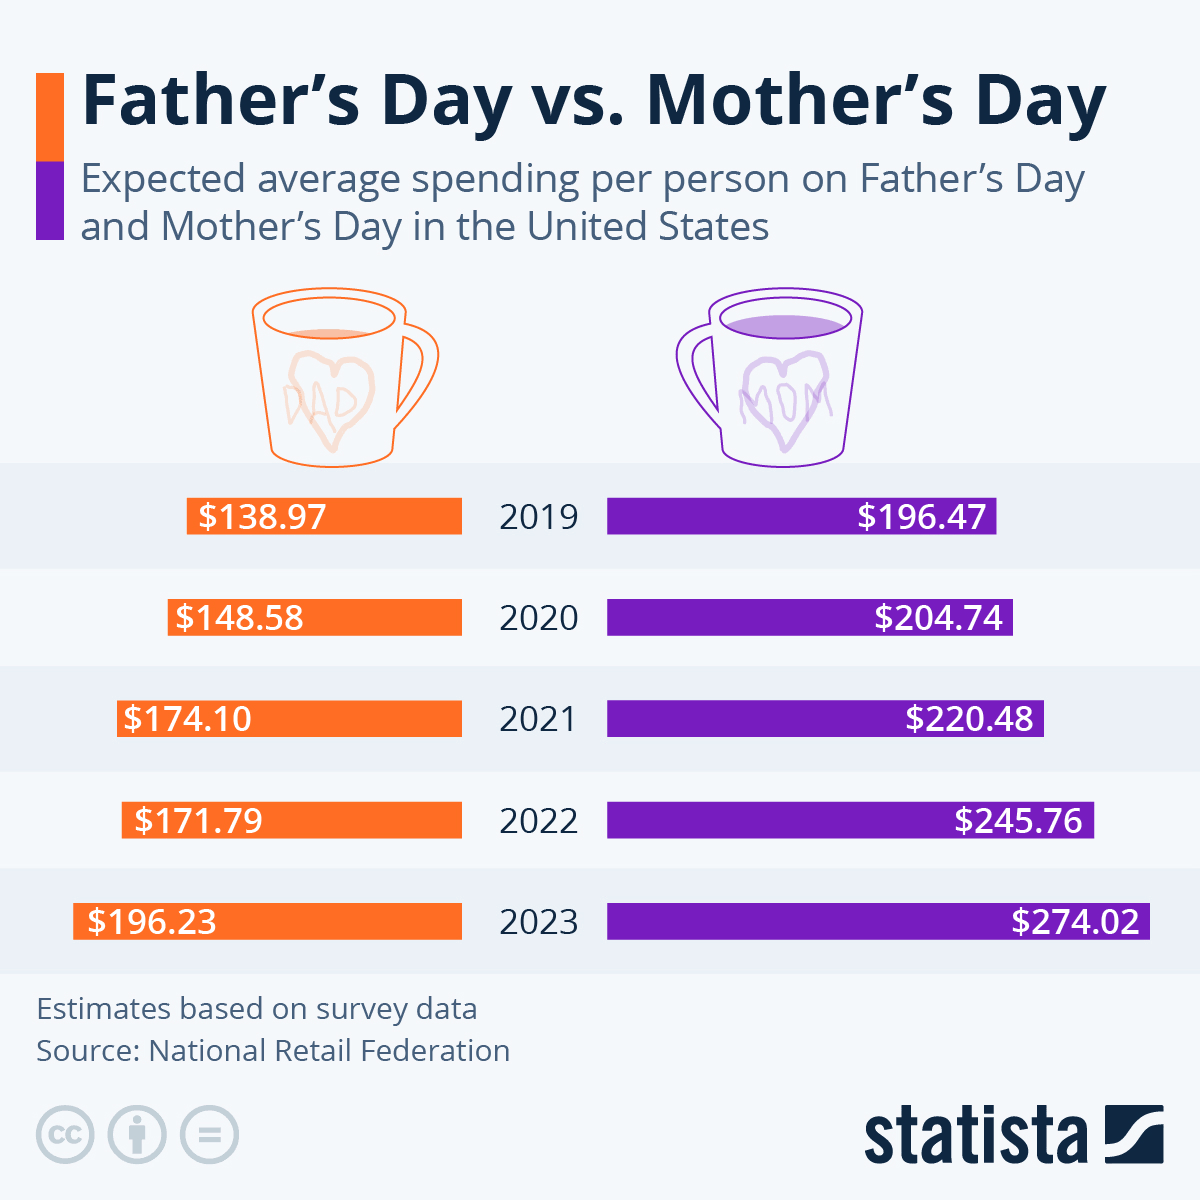 I knew Mother's day was a big but was surprised that Father's day is also a $22.9 billion industry and not too far behind. It's also crazy to think that the average spending in the US per person on Mother's Day is $274 🤯.